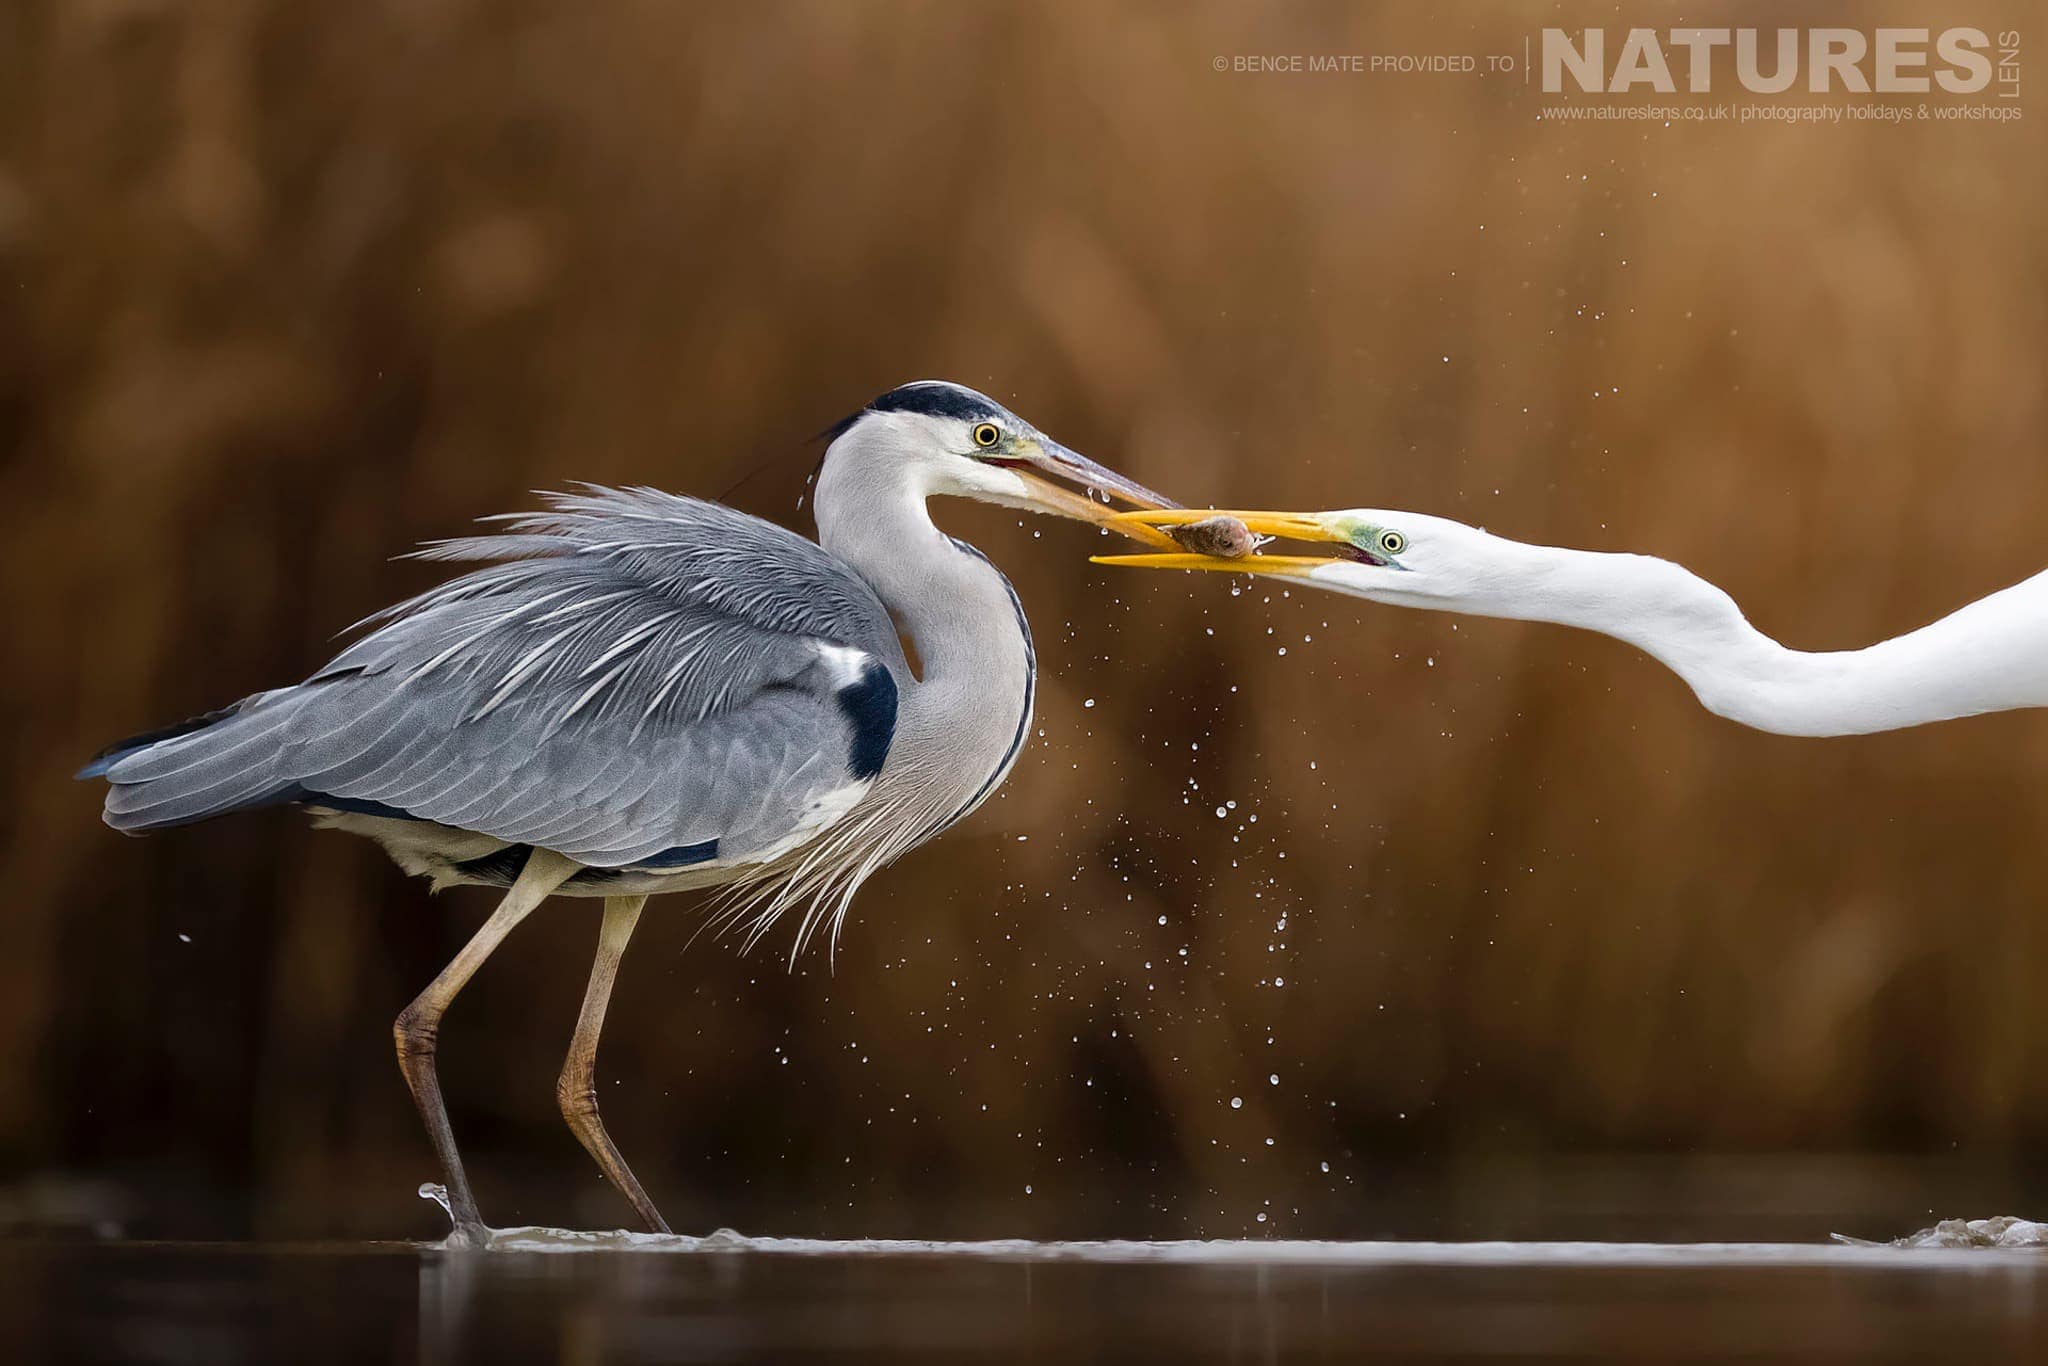 Fighting Wading Birds At Bence Mates Photography Hides During The Hungarian Winter